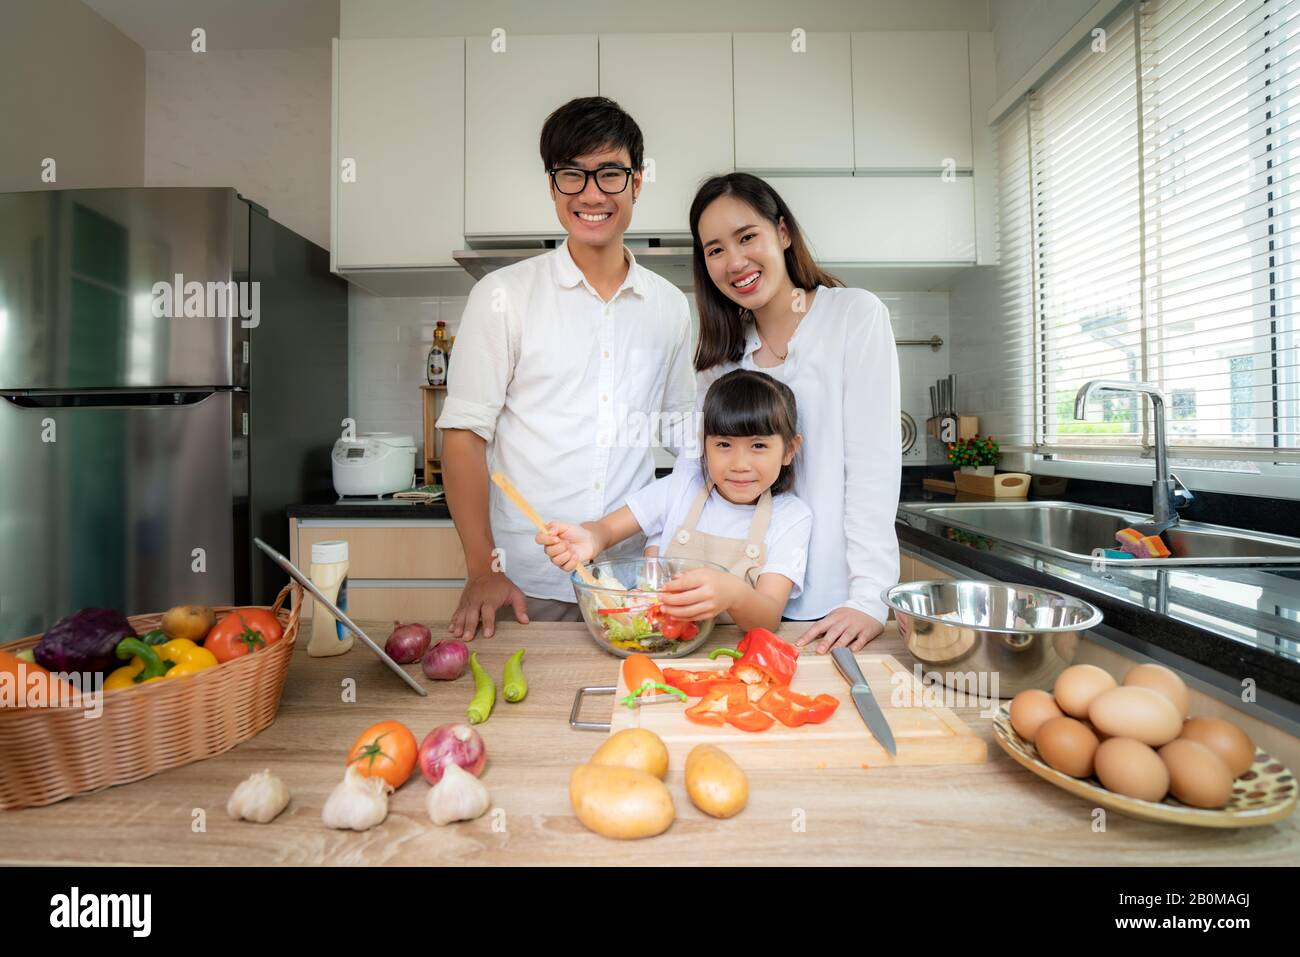 Asian family with father, mother and daughter shredded vegetable salad and look at camera while the family was cooking in the kitchen at home. Family Stock Photo